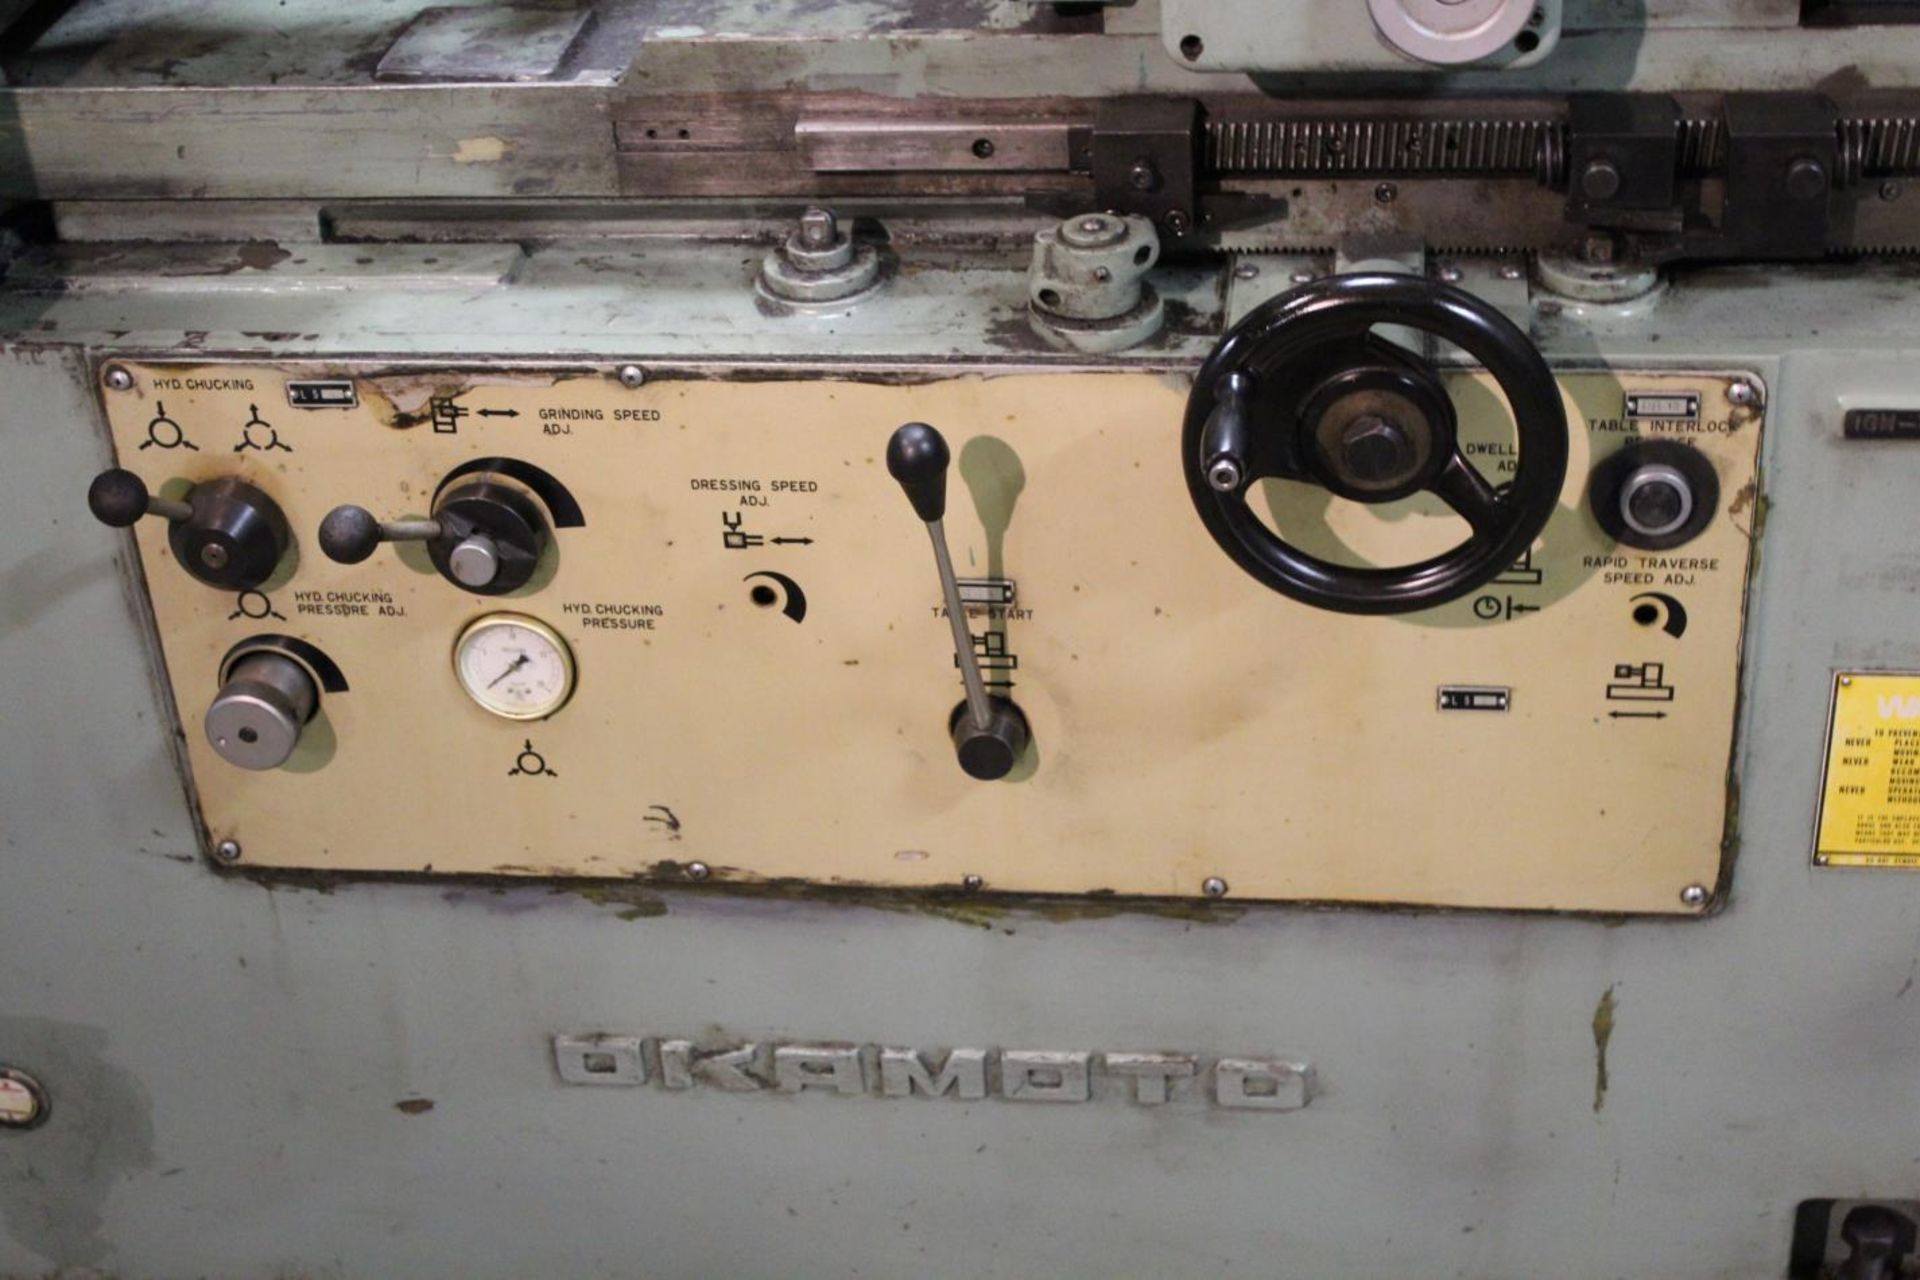 Okamoto IGM-1E Internal Grinder with Accessories (video)  230/460v/3ph - Image 3 of 14